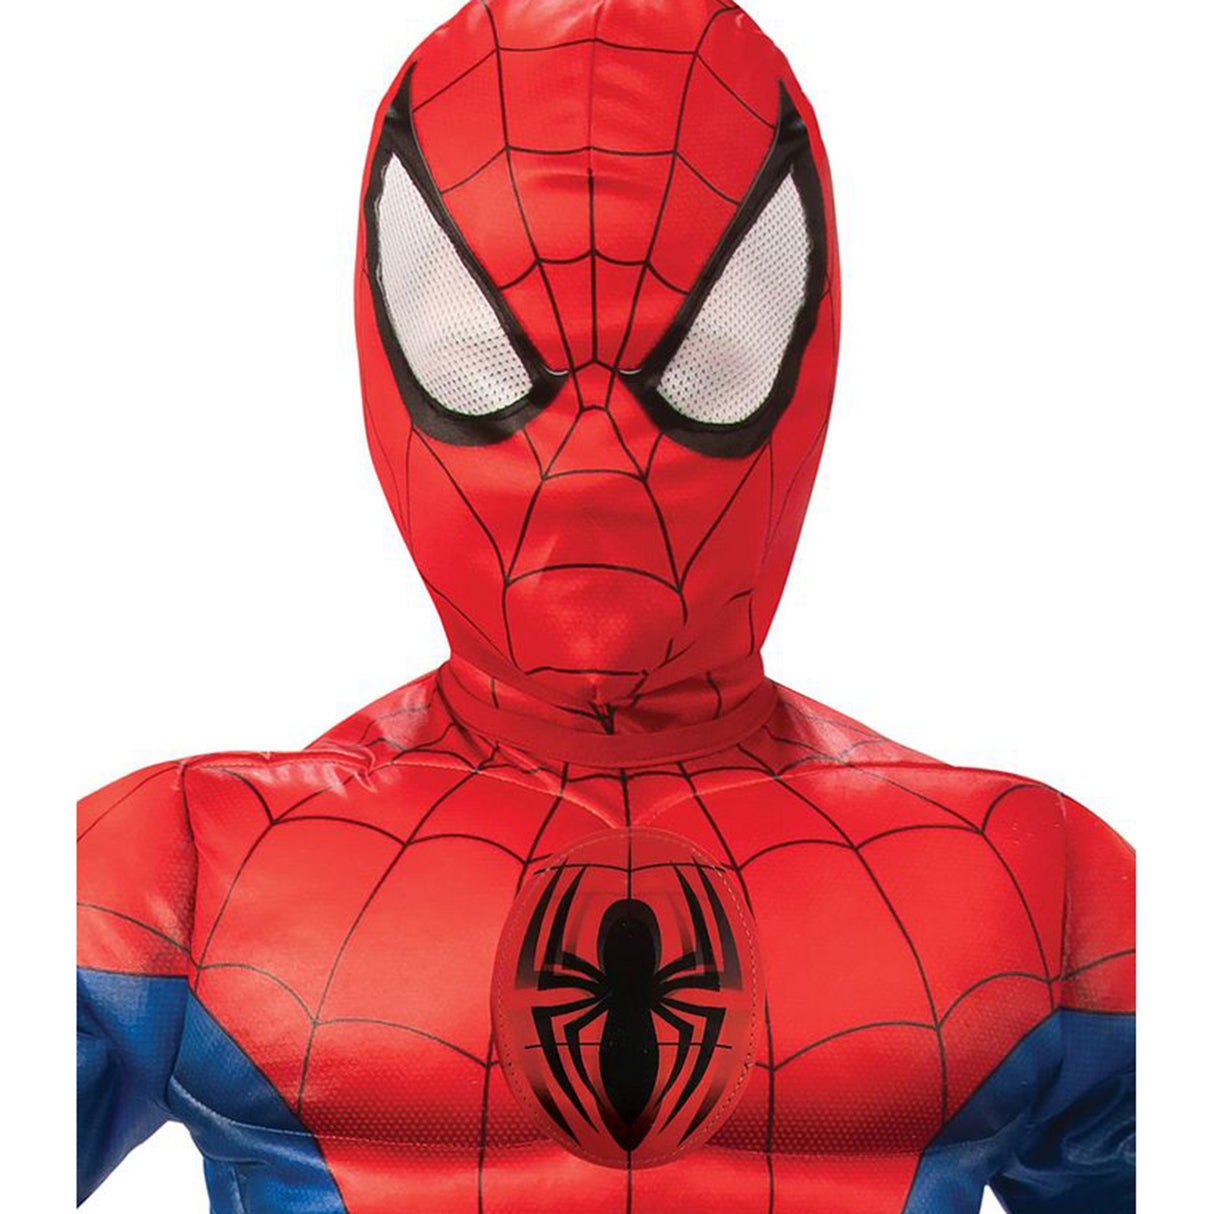 Rubies Spider-Man Deluxe Kids Costume, Red (6-8 years)